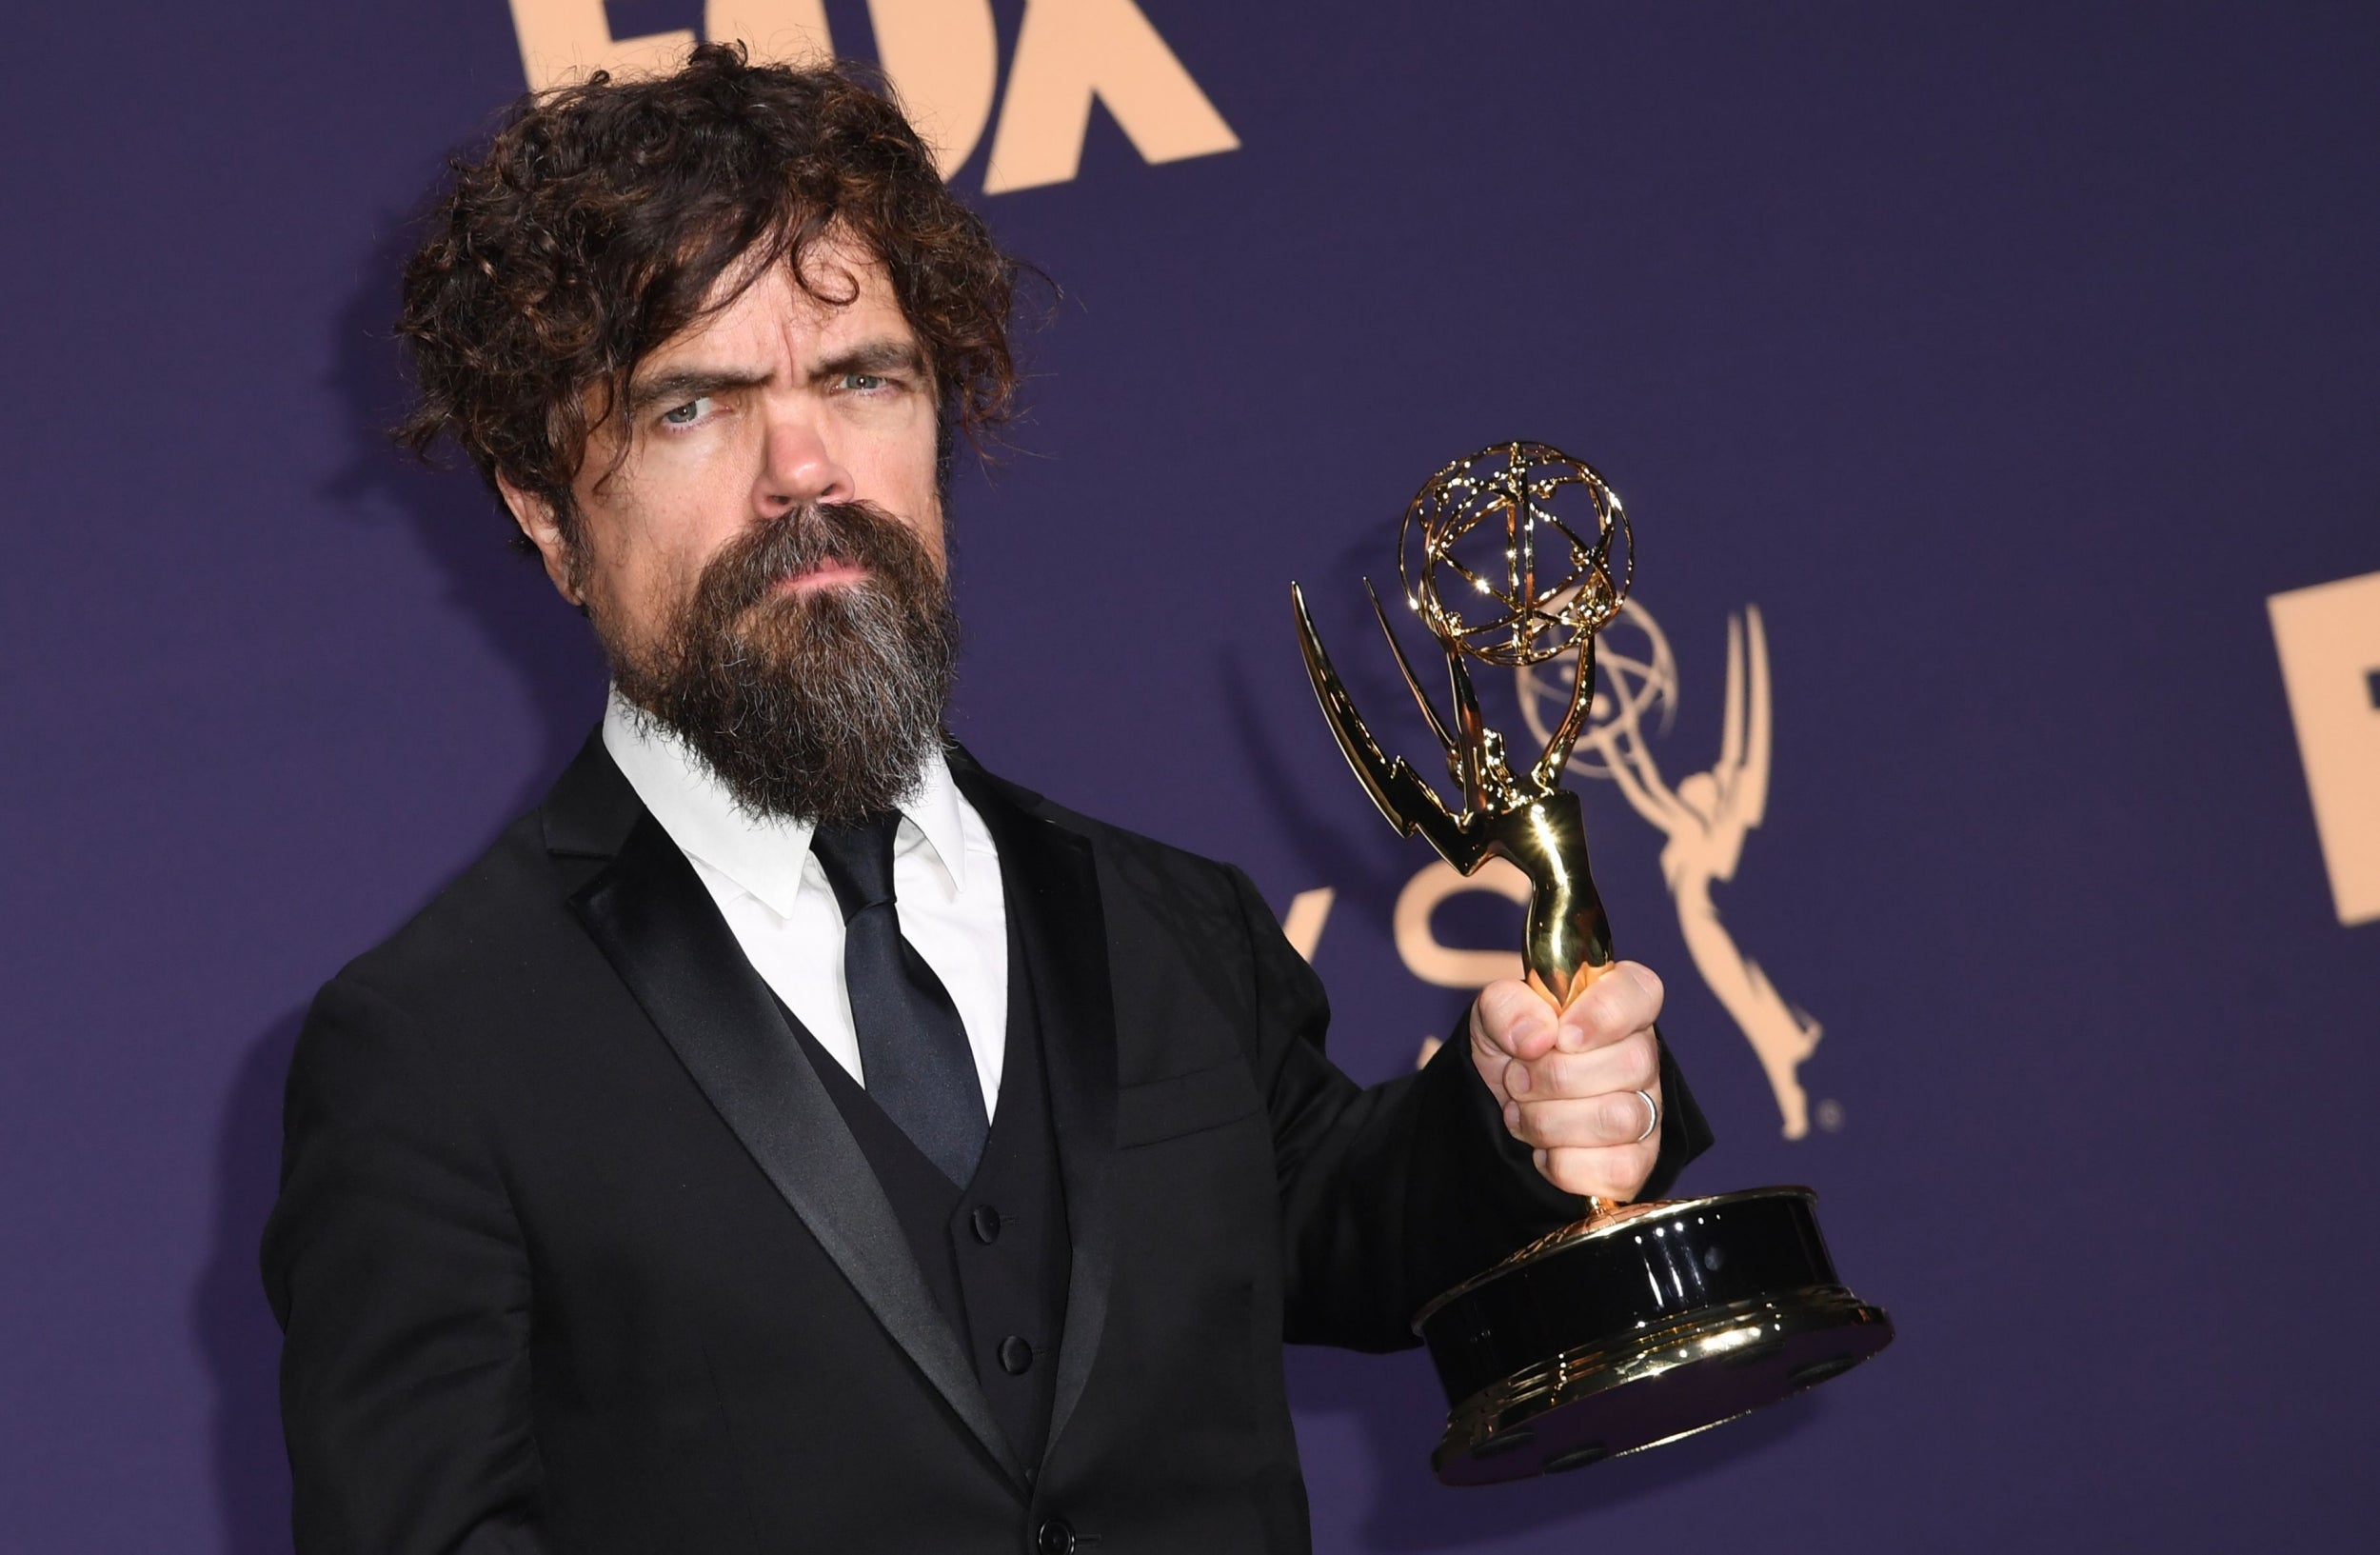 Peter Dinklage is right the Snow White remake is ‘f***ing backwards